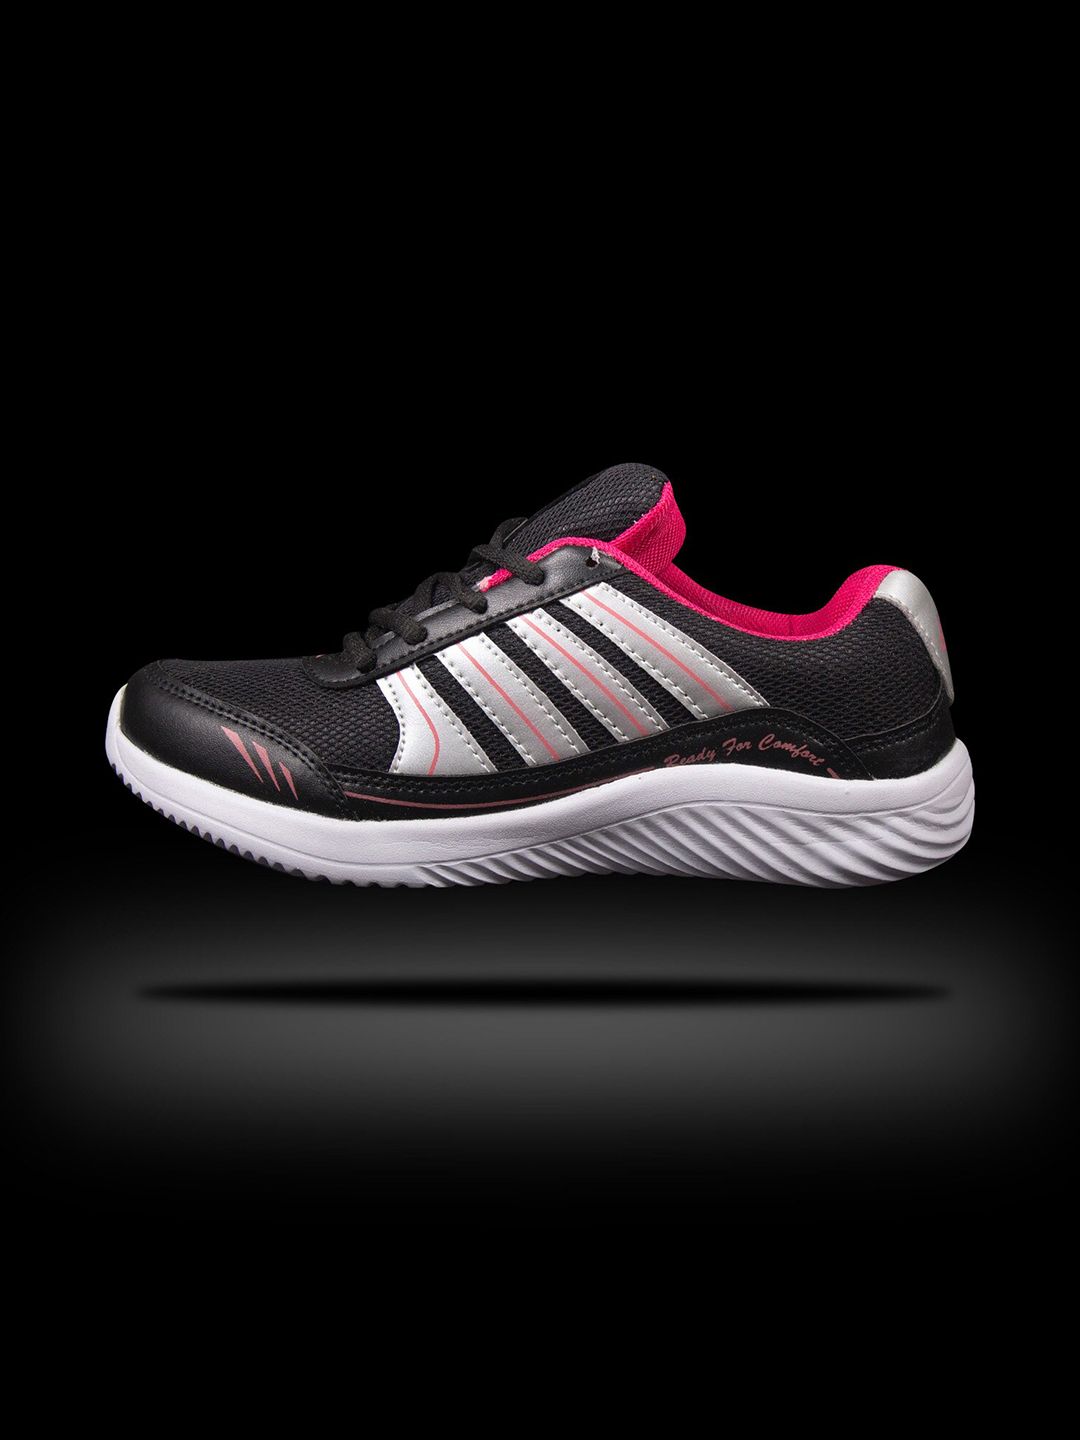 ASIAN Women Black Mesh Running Sports Shoes Price in India